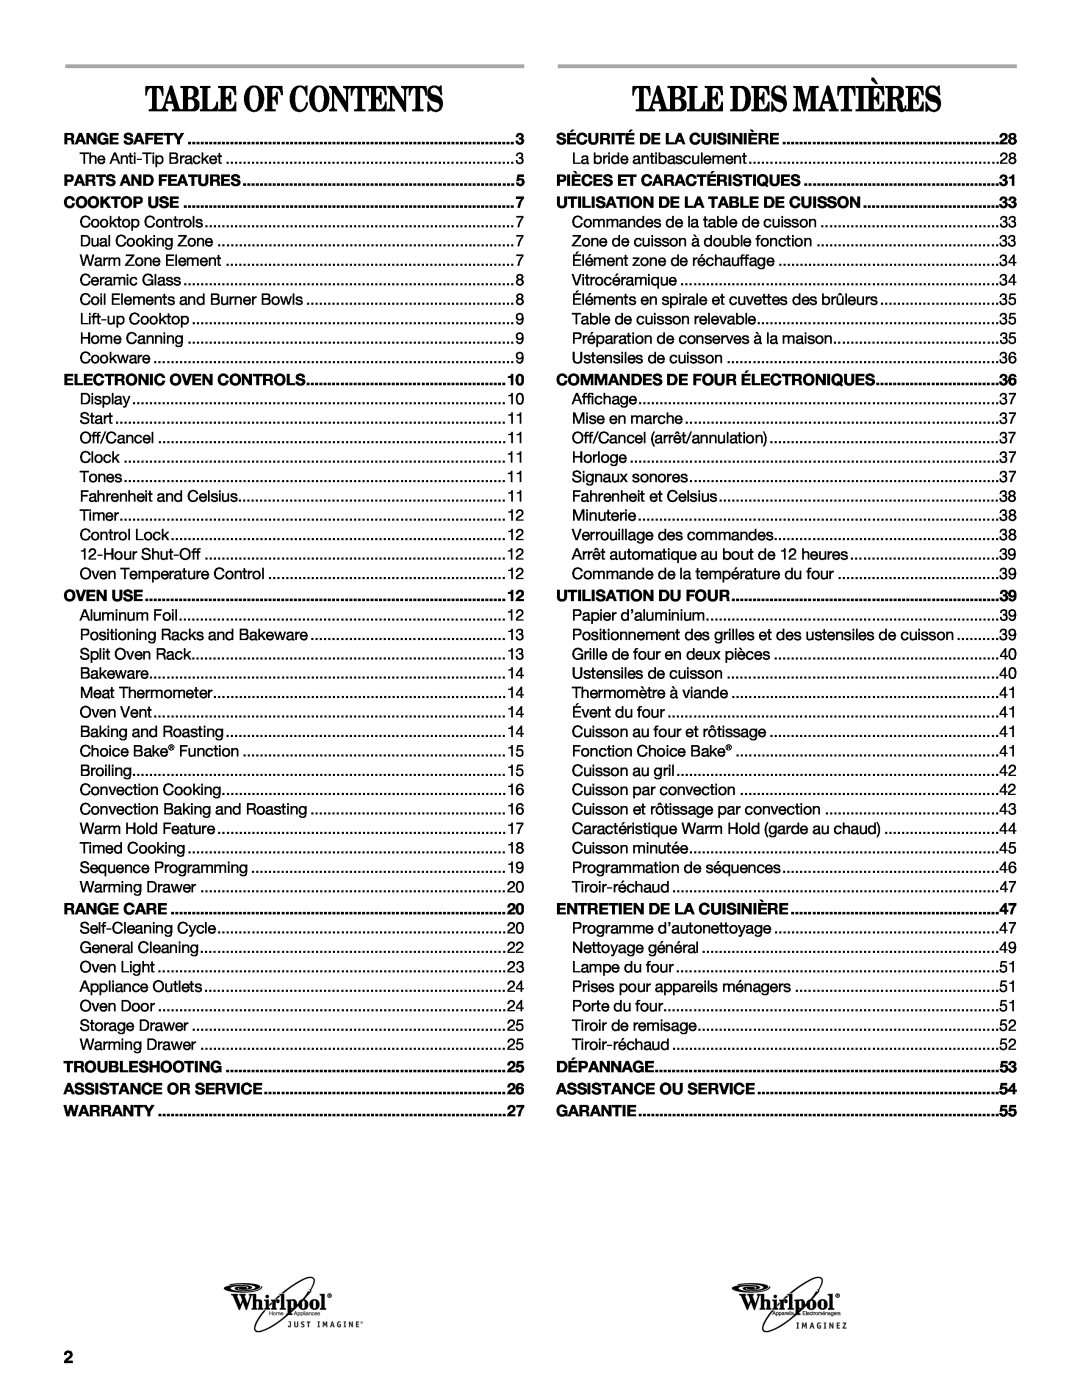 Whirlpool 9758899 manual Table Of Contents, Table Des Matières 